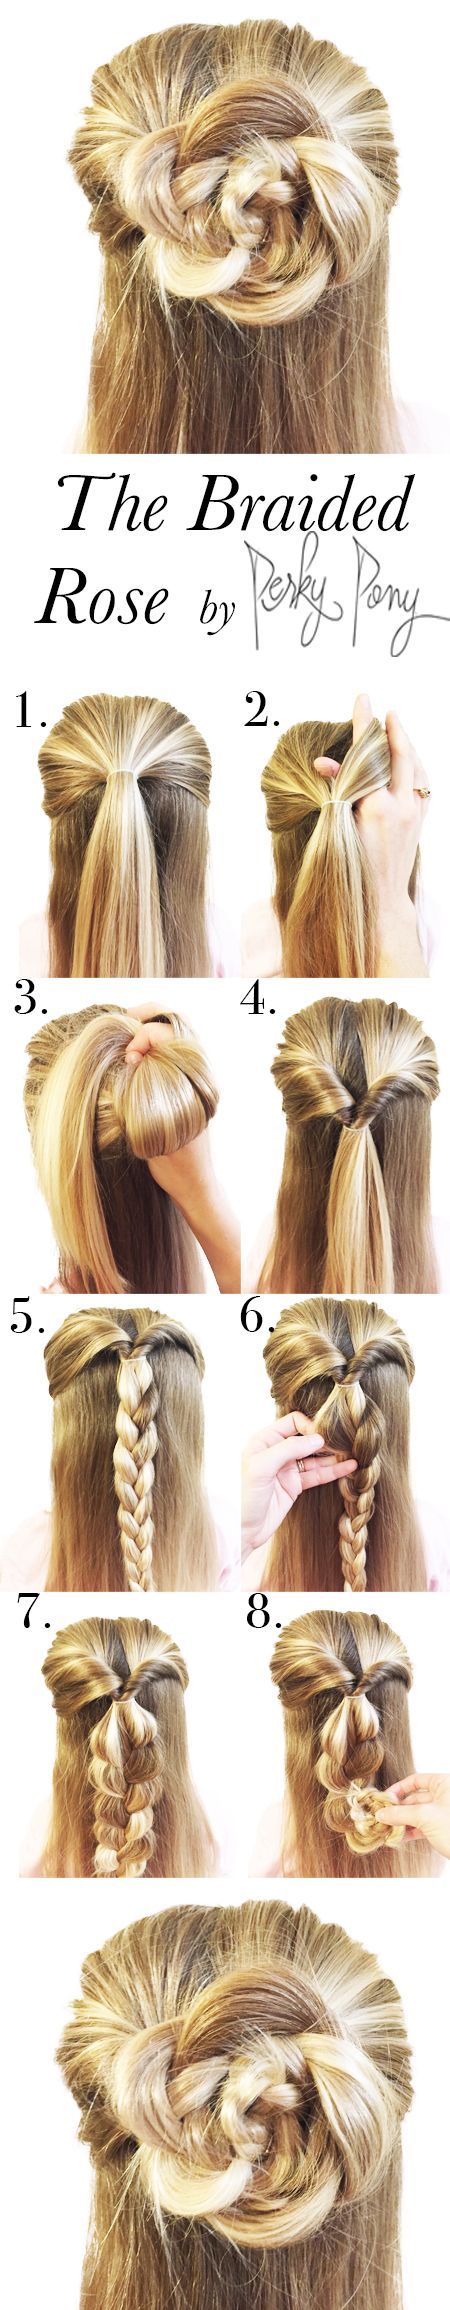 12 simple and simple hairstyles for your daily look